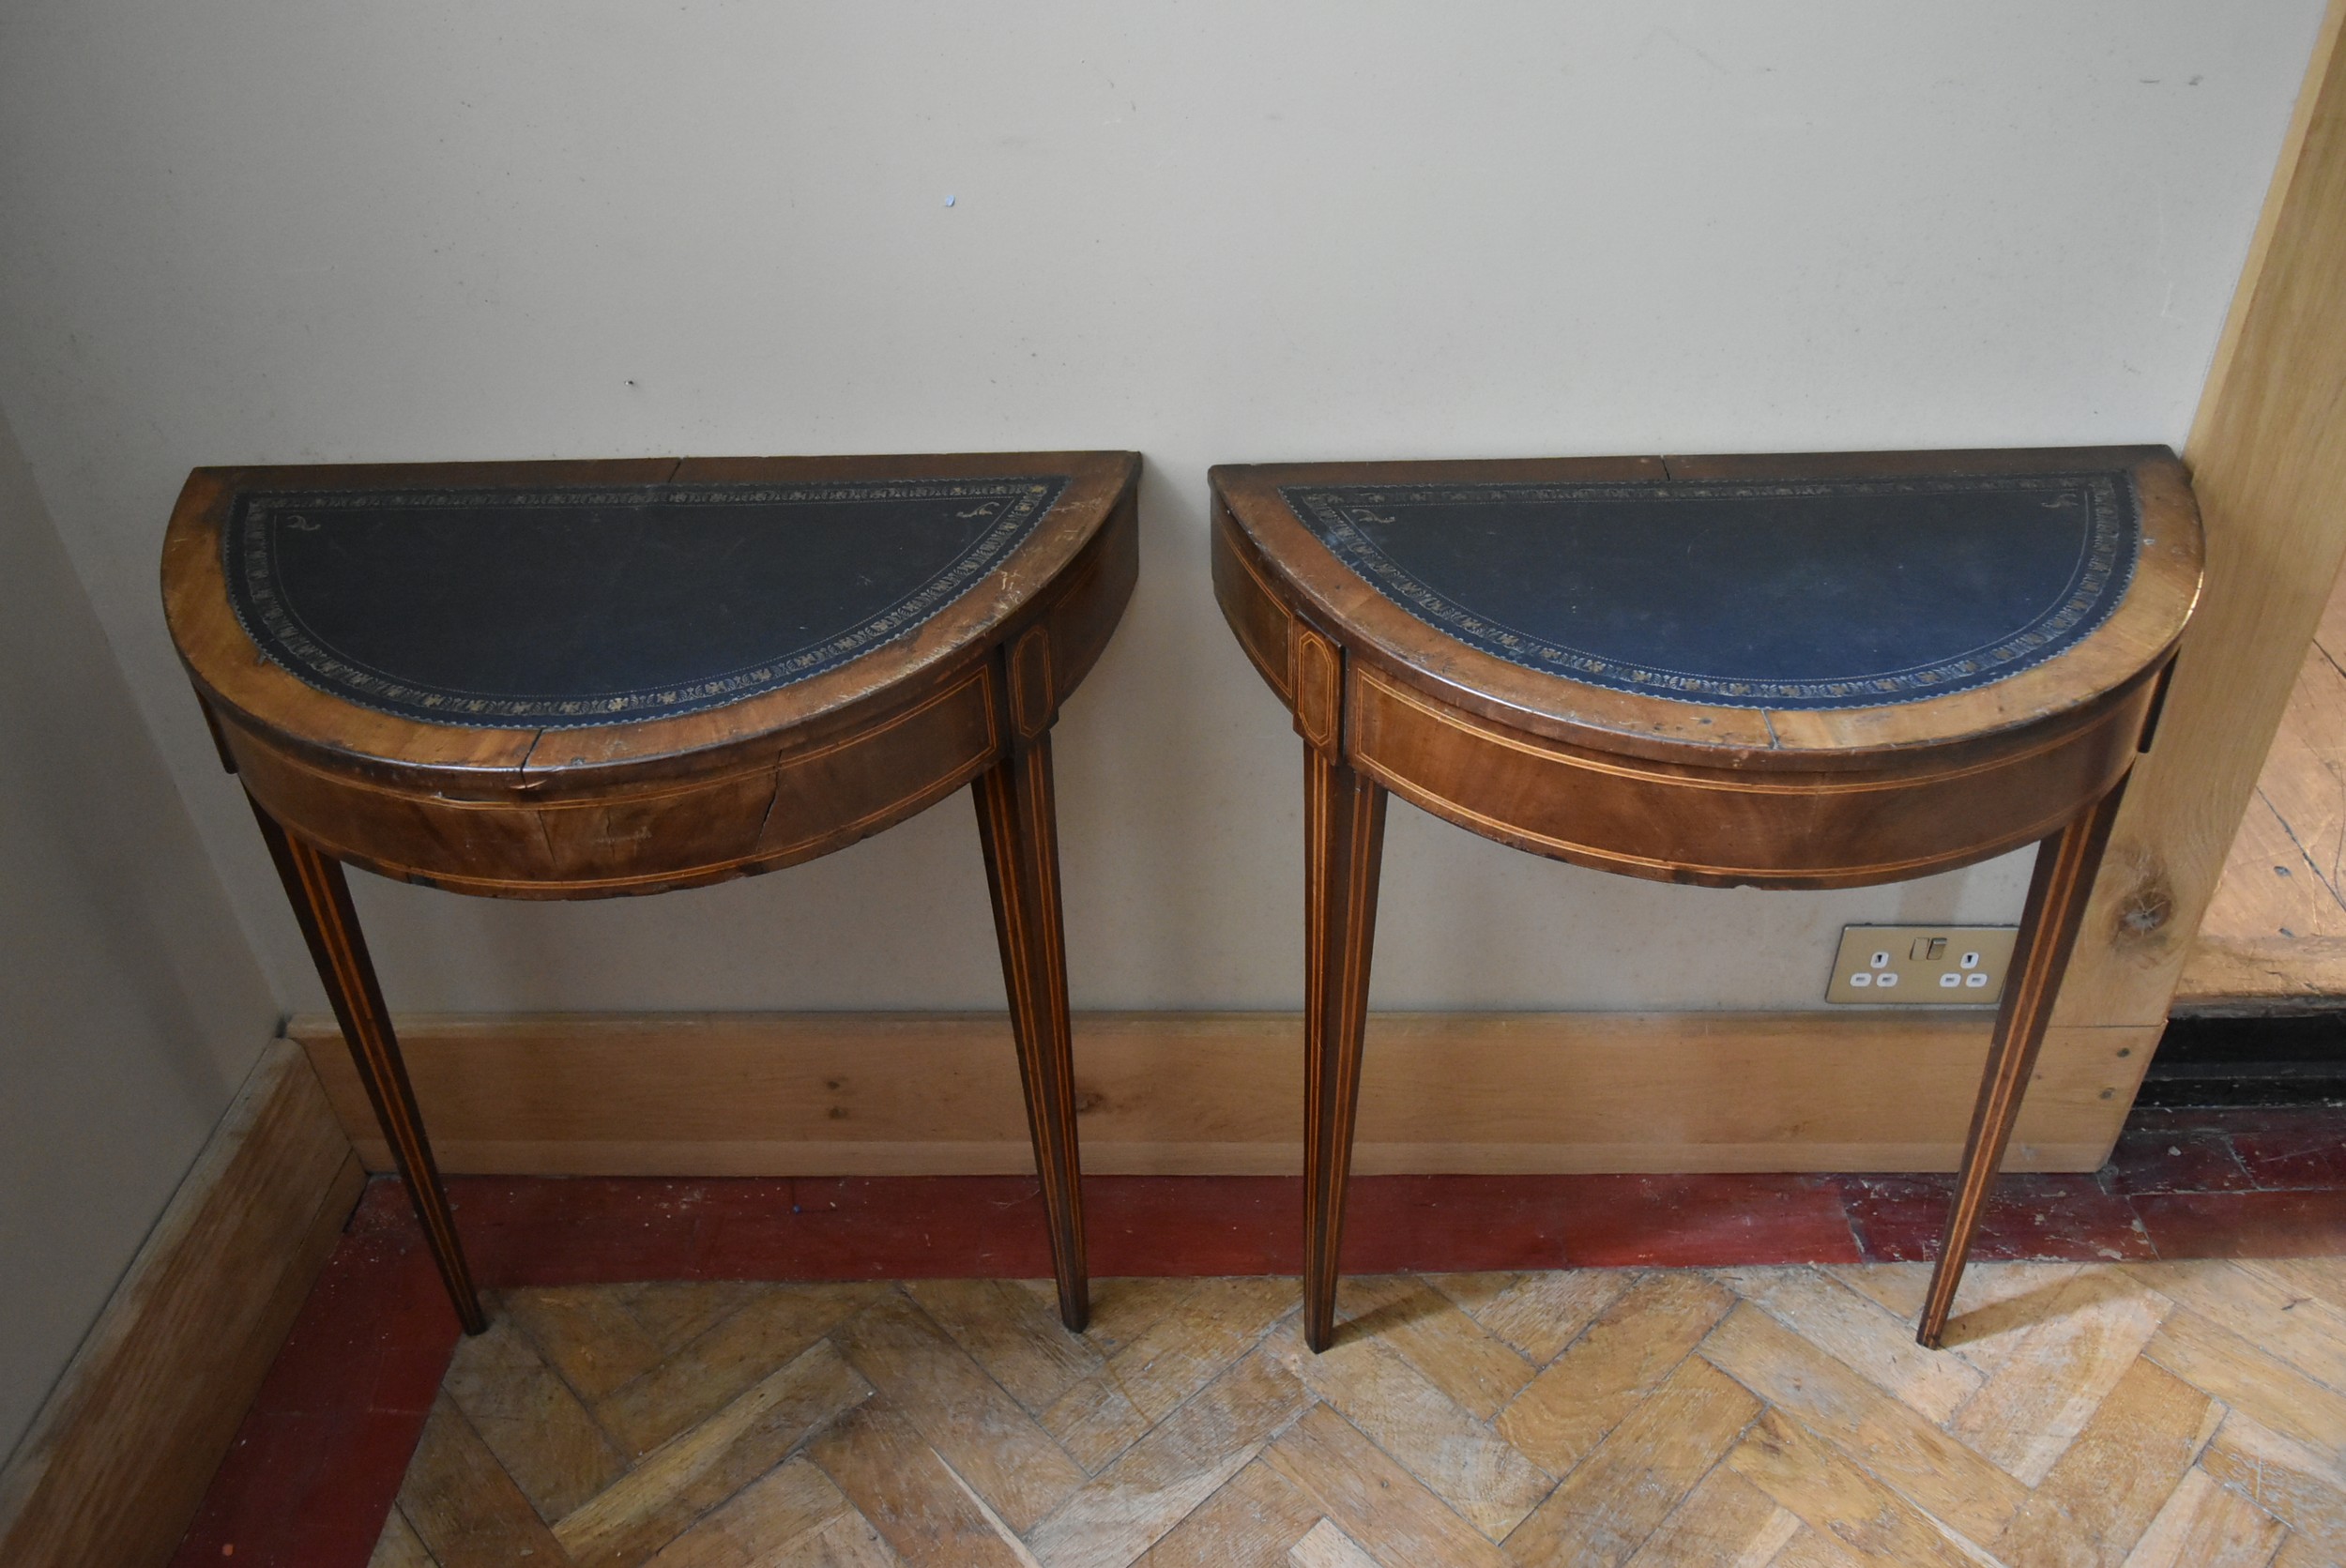 A pair of 19th century mahogany and satinwood strung demi lune console tables with inset leather - Image 2 of 4